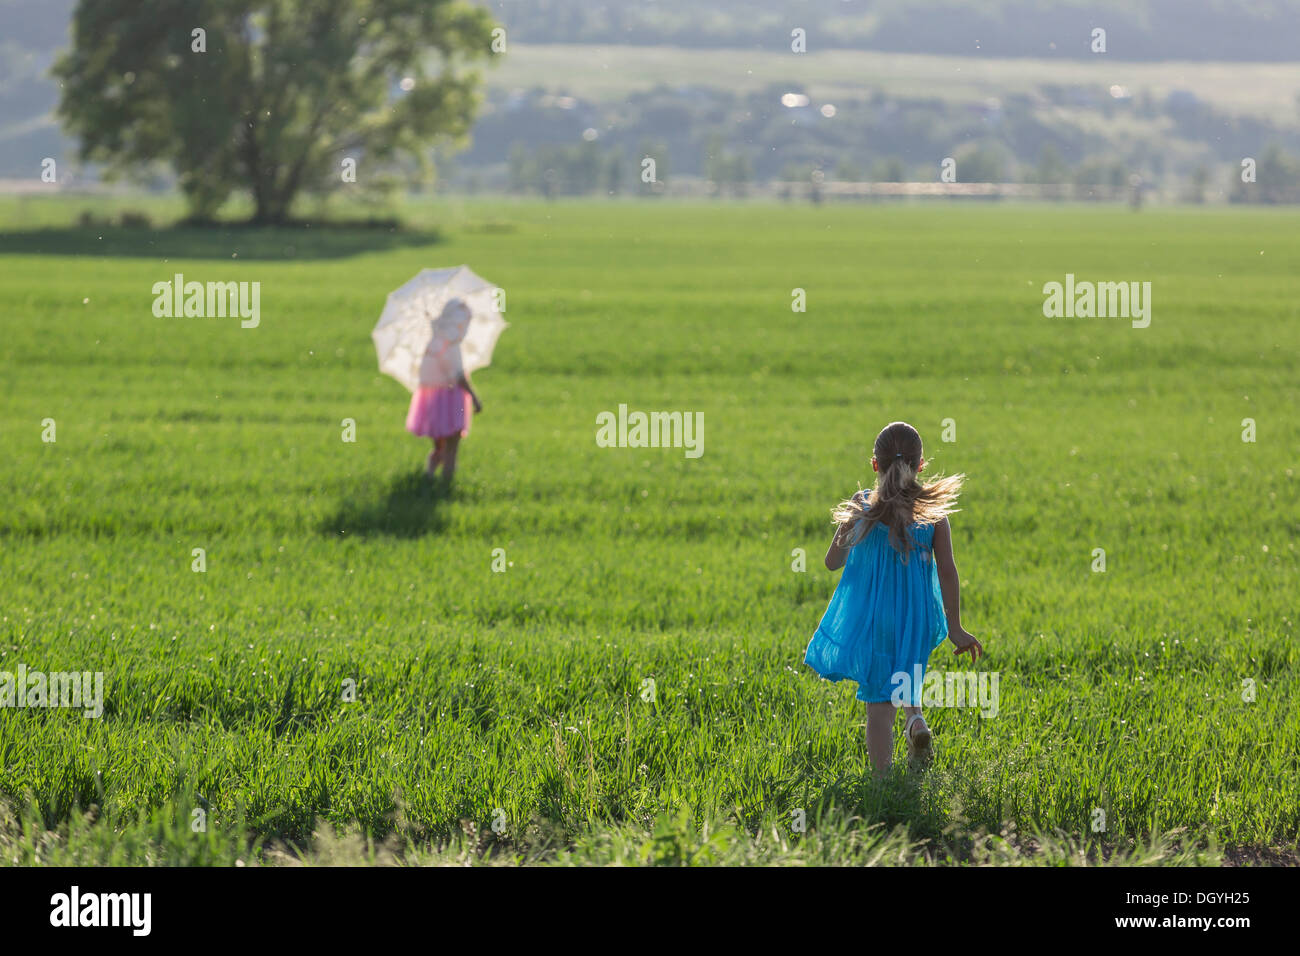 A young girl running to catch up with her twin sister in sunny field Stock Photo